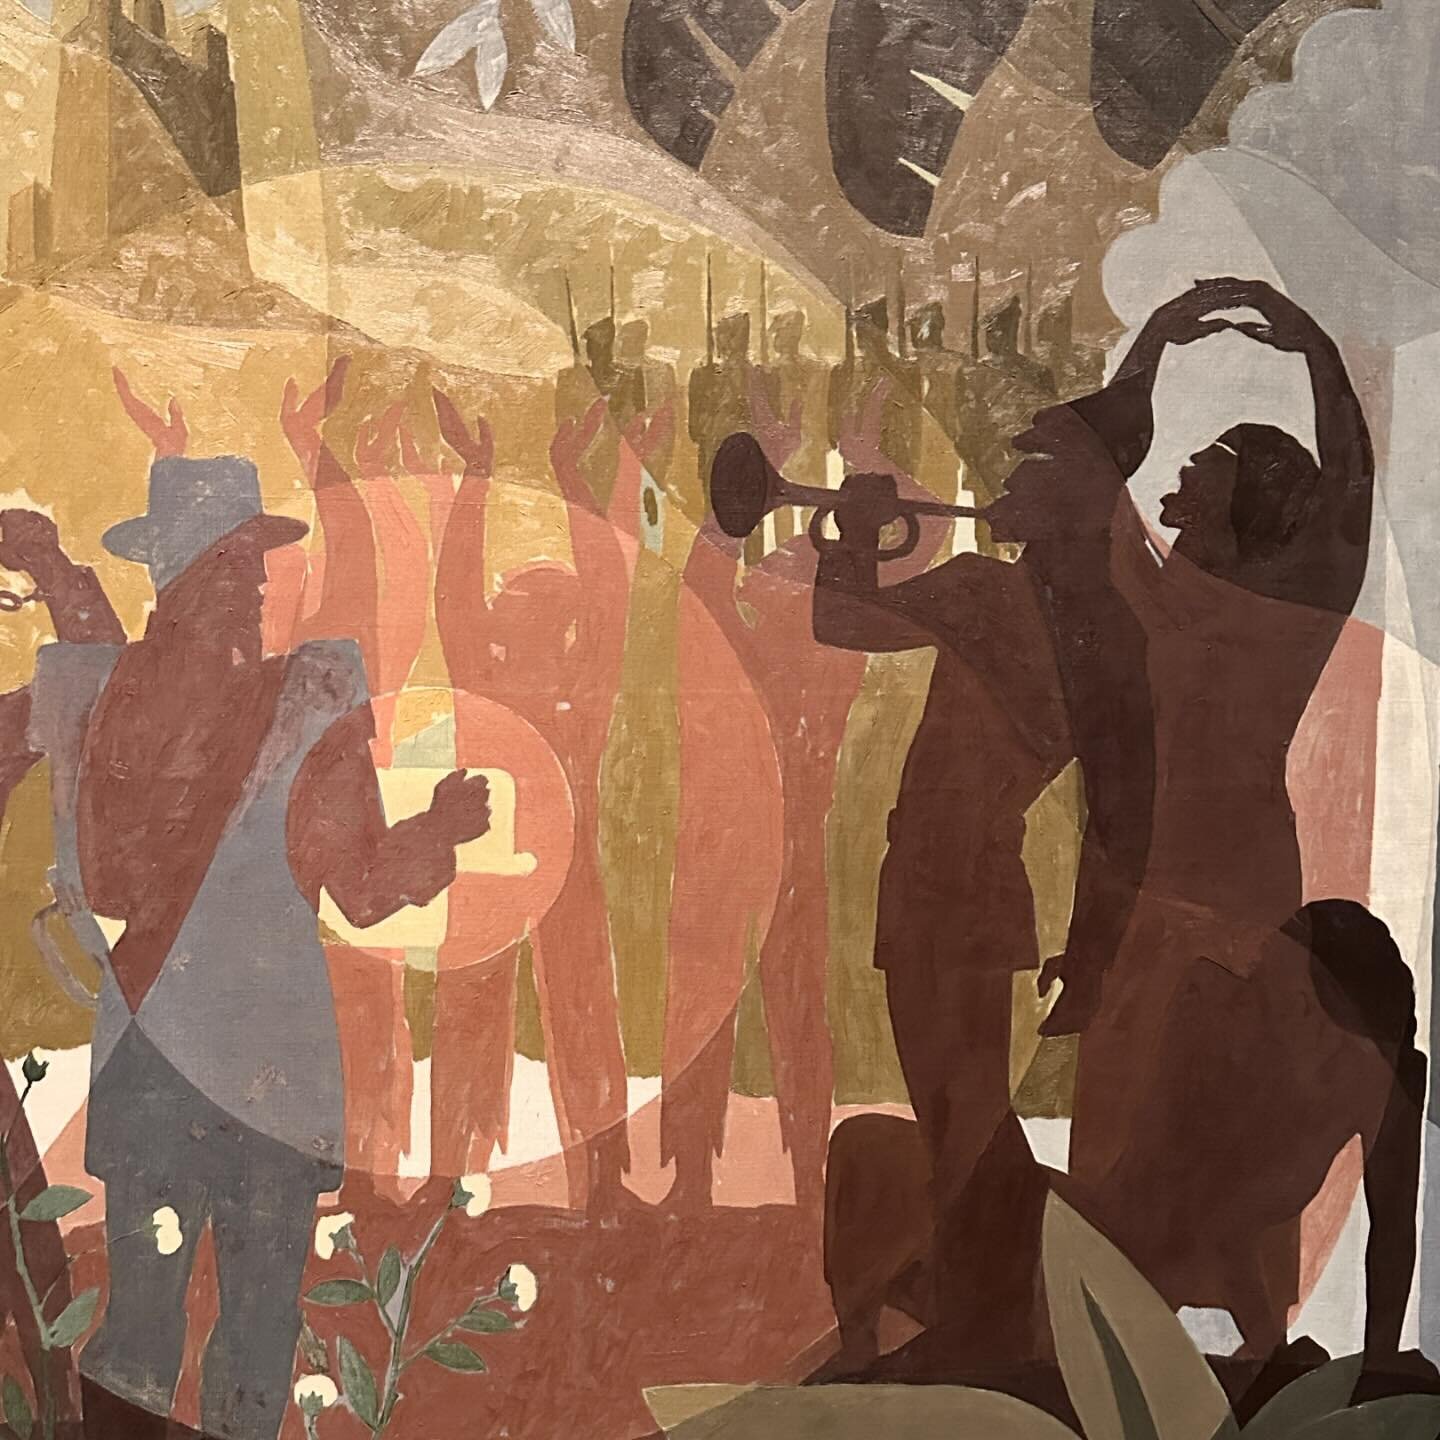 Aaron Douglas epic mural, Aspects of Negro Life: From Slavery Through Reconstruction, 1934, on display now, in the extensive Harlem Renaissance exhibit @metmuseum.
#aarondouglas #harlemrenaissance #themet